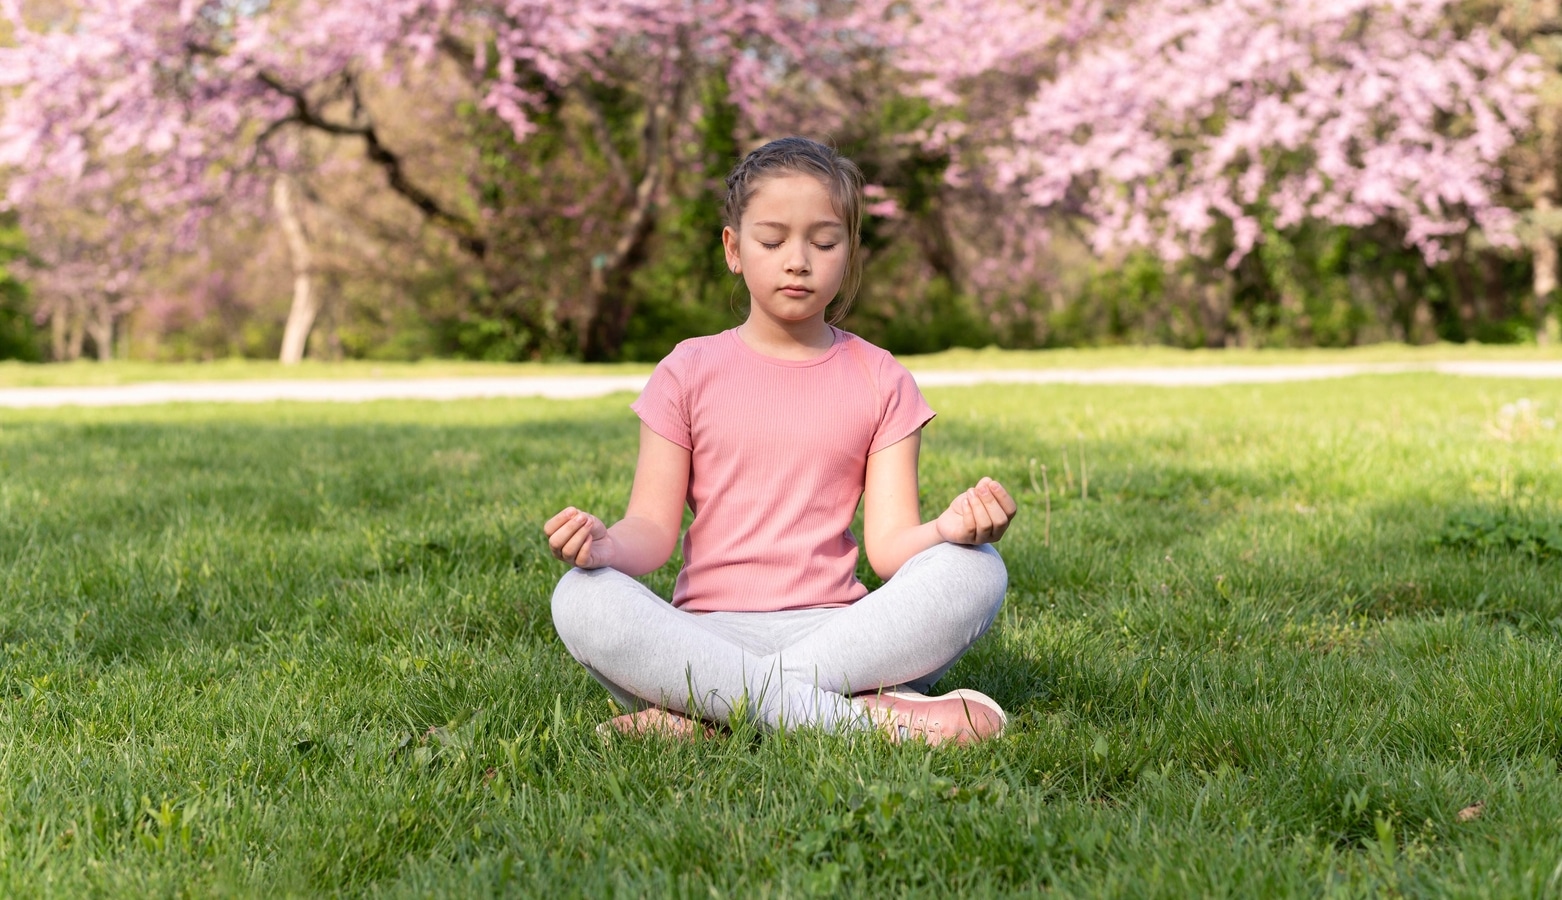 How to calm down a hyperactive child through yoga - Times of India